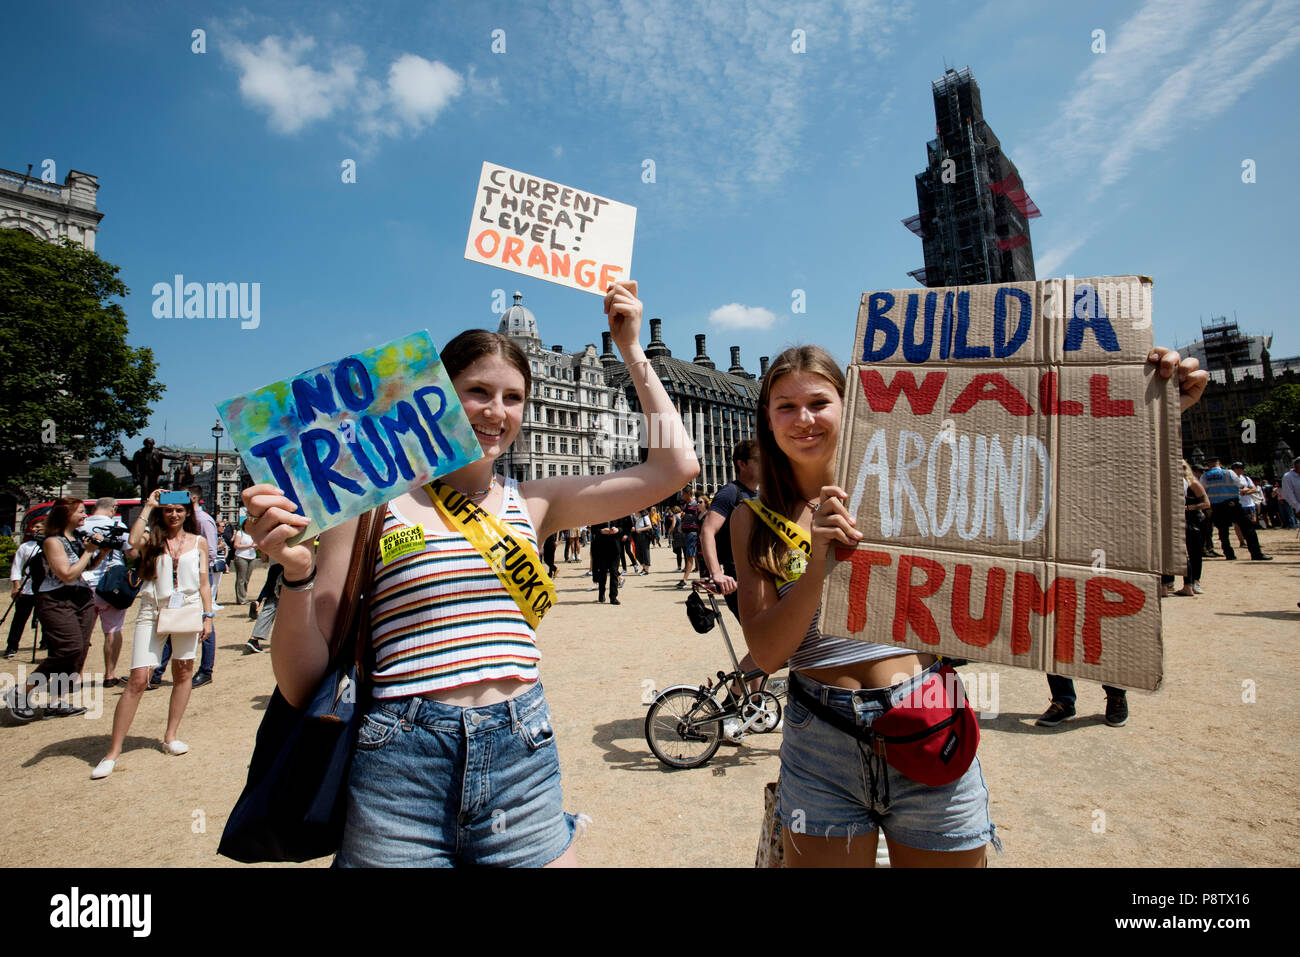 President Trump demonstrations, London, England UK. 13 July 2018 Anti US President Trump demonstrations in Parliament Square, Westminster, London England today. Credit: BRIAN HARRIS/Alamy Live News Stock Photo